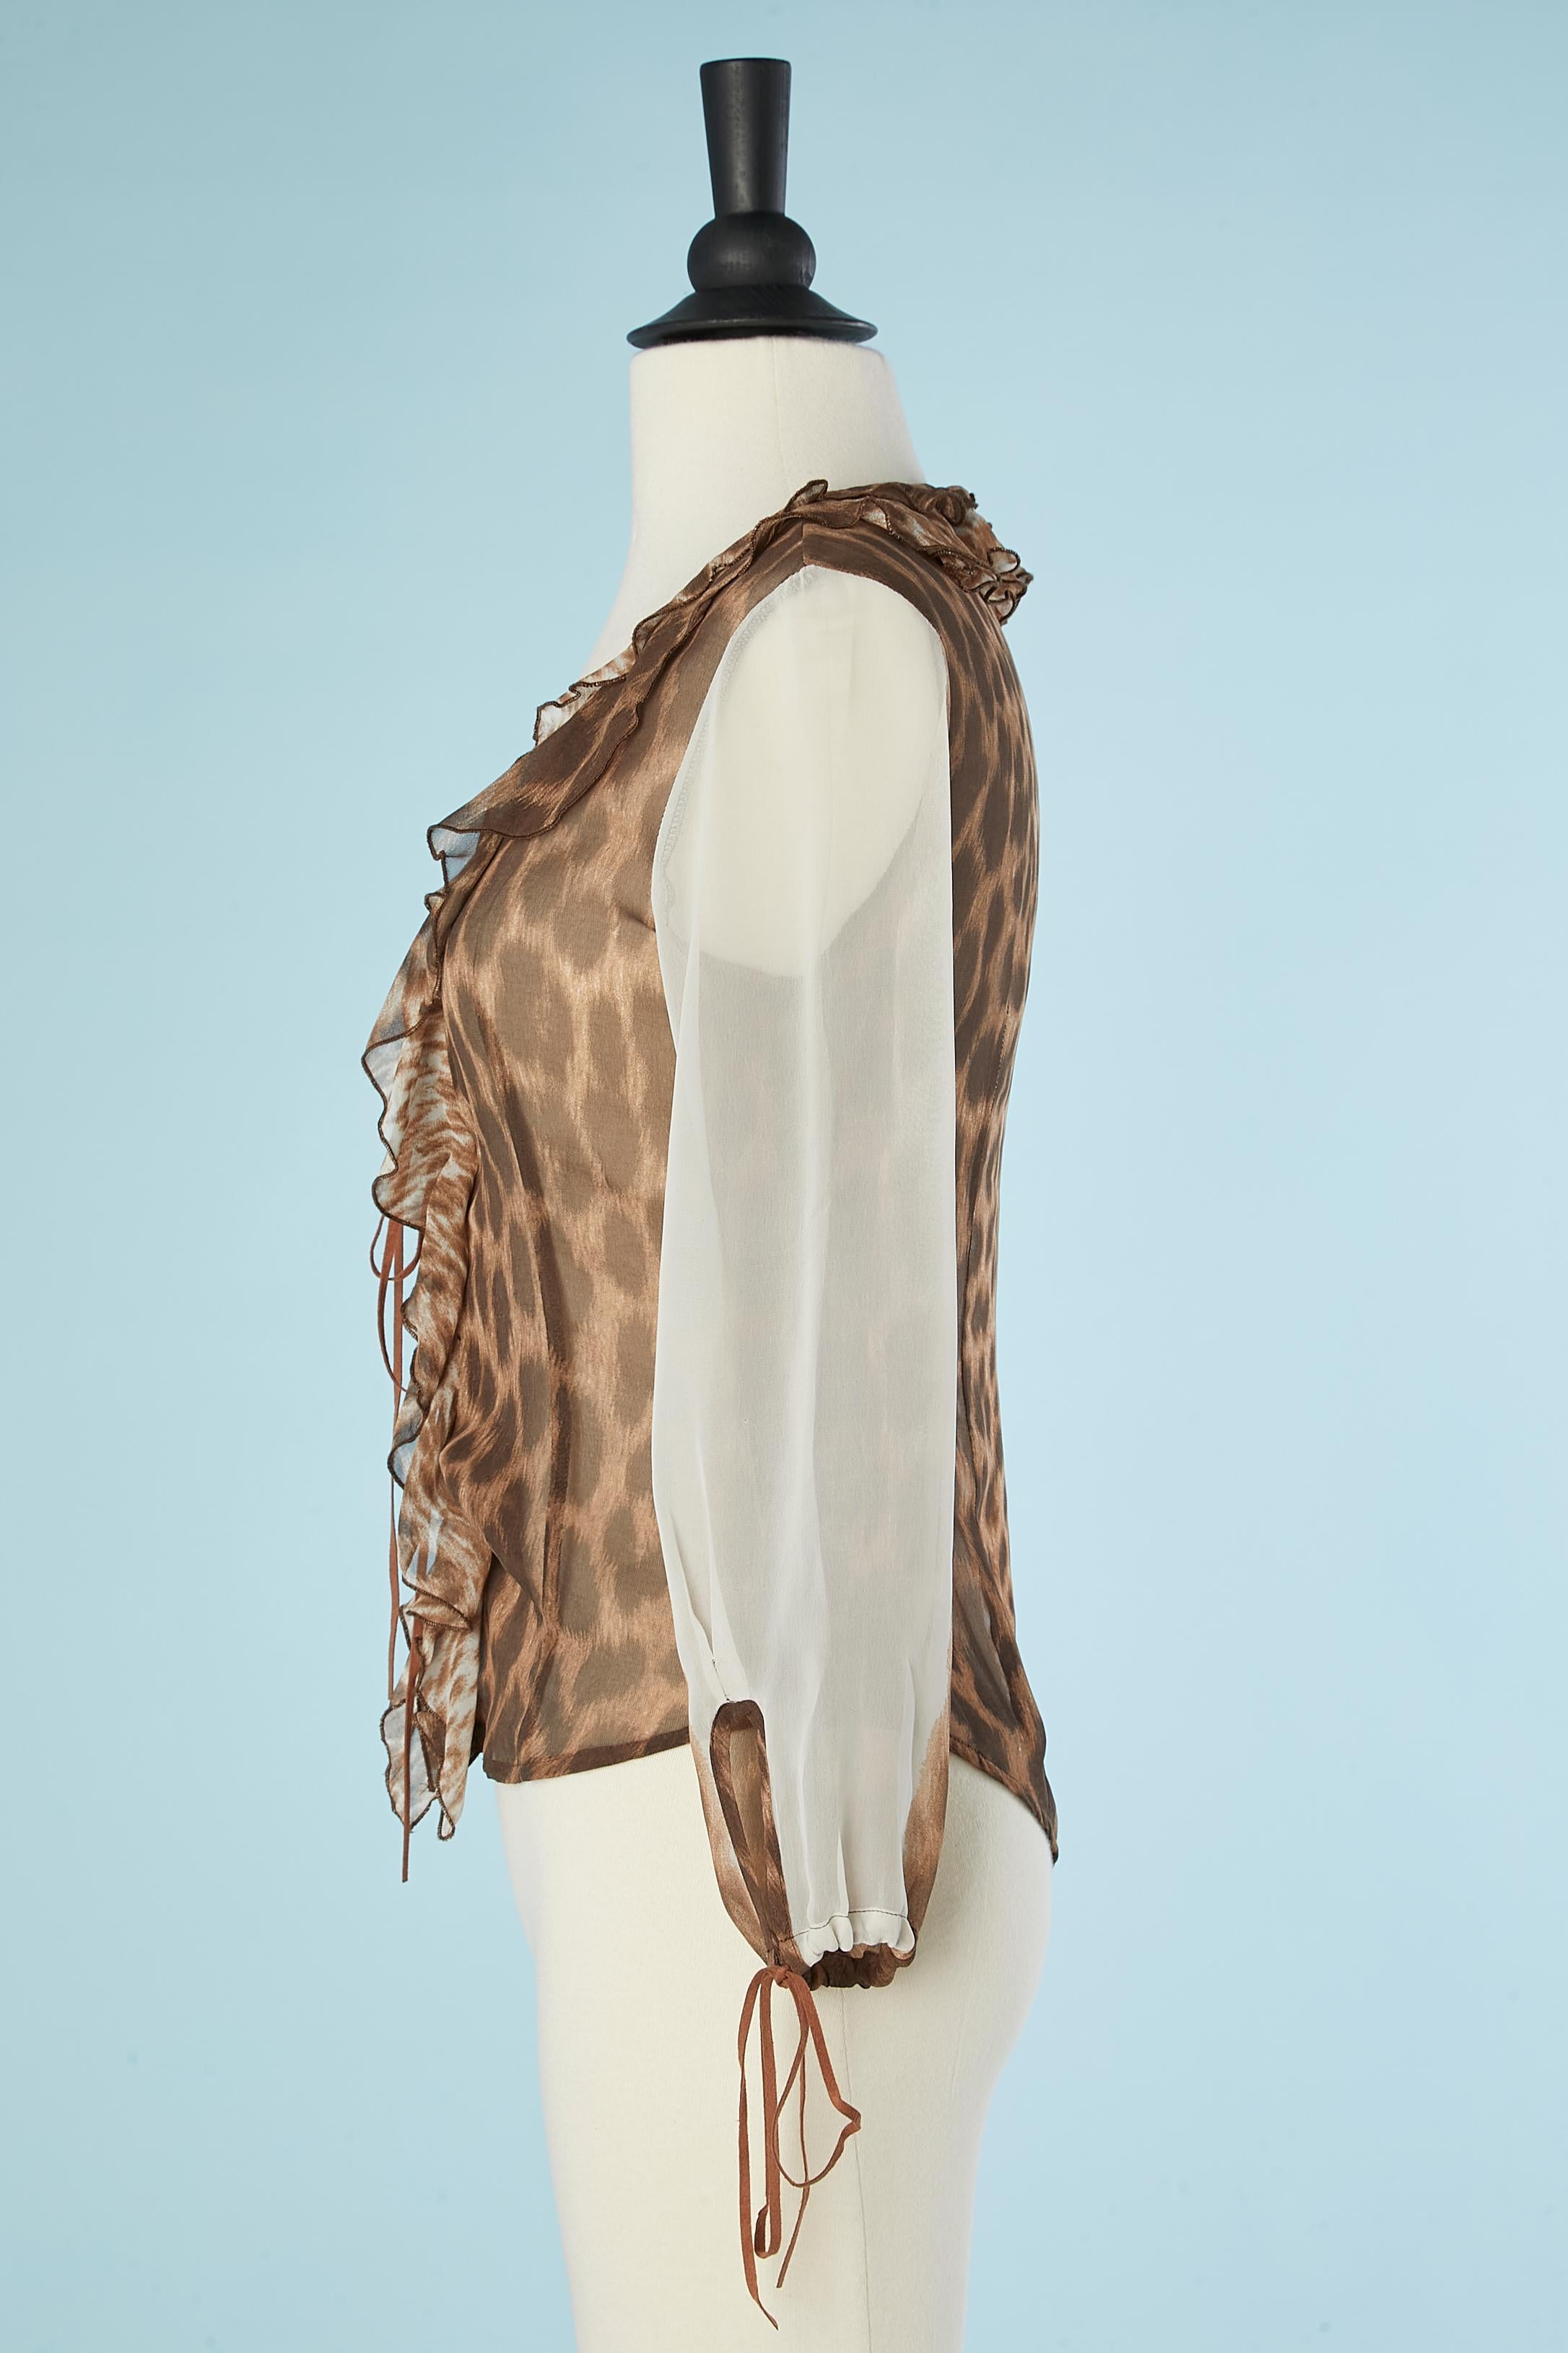 See-through animal printed top with suede laced middle front  Just Cavalli  In Excellent Condition For Sale In Saint-Ouen-Sur-Seine, FR